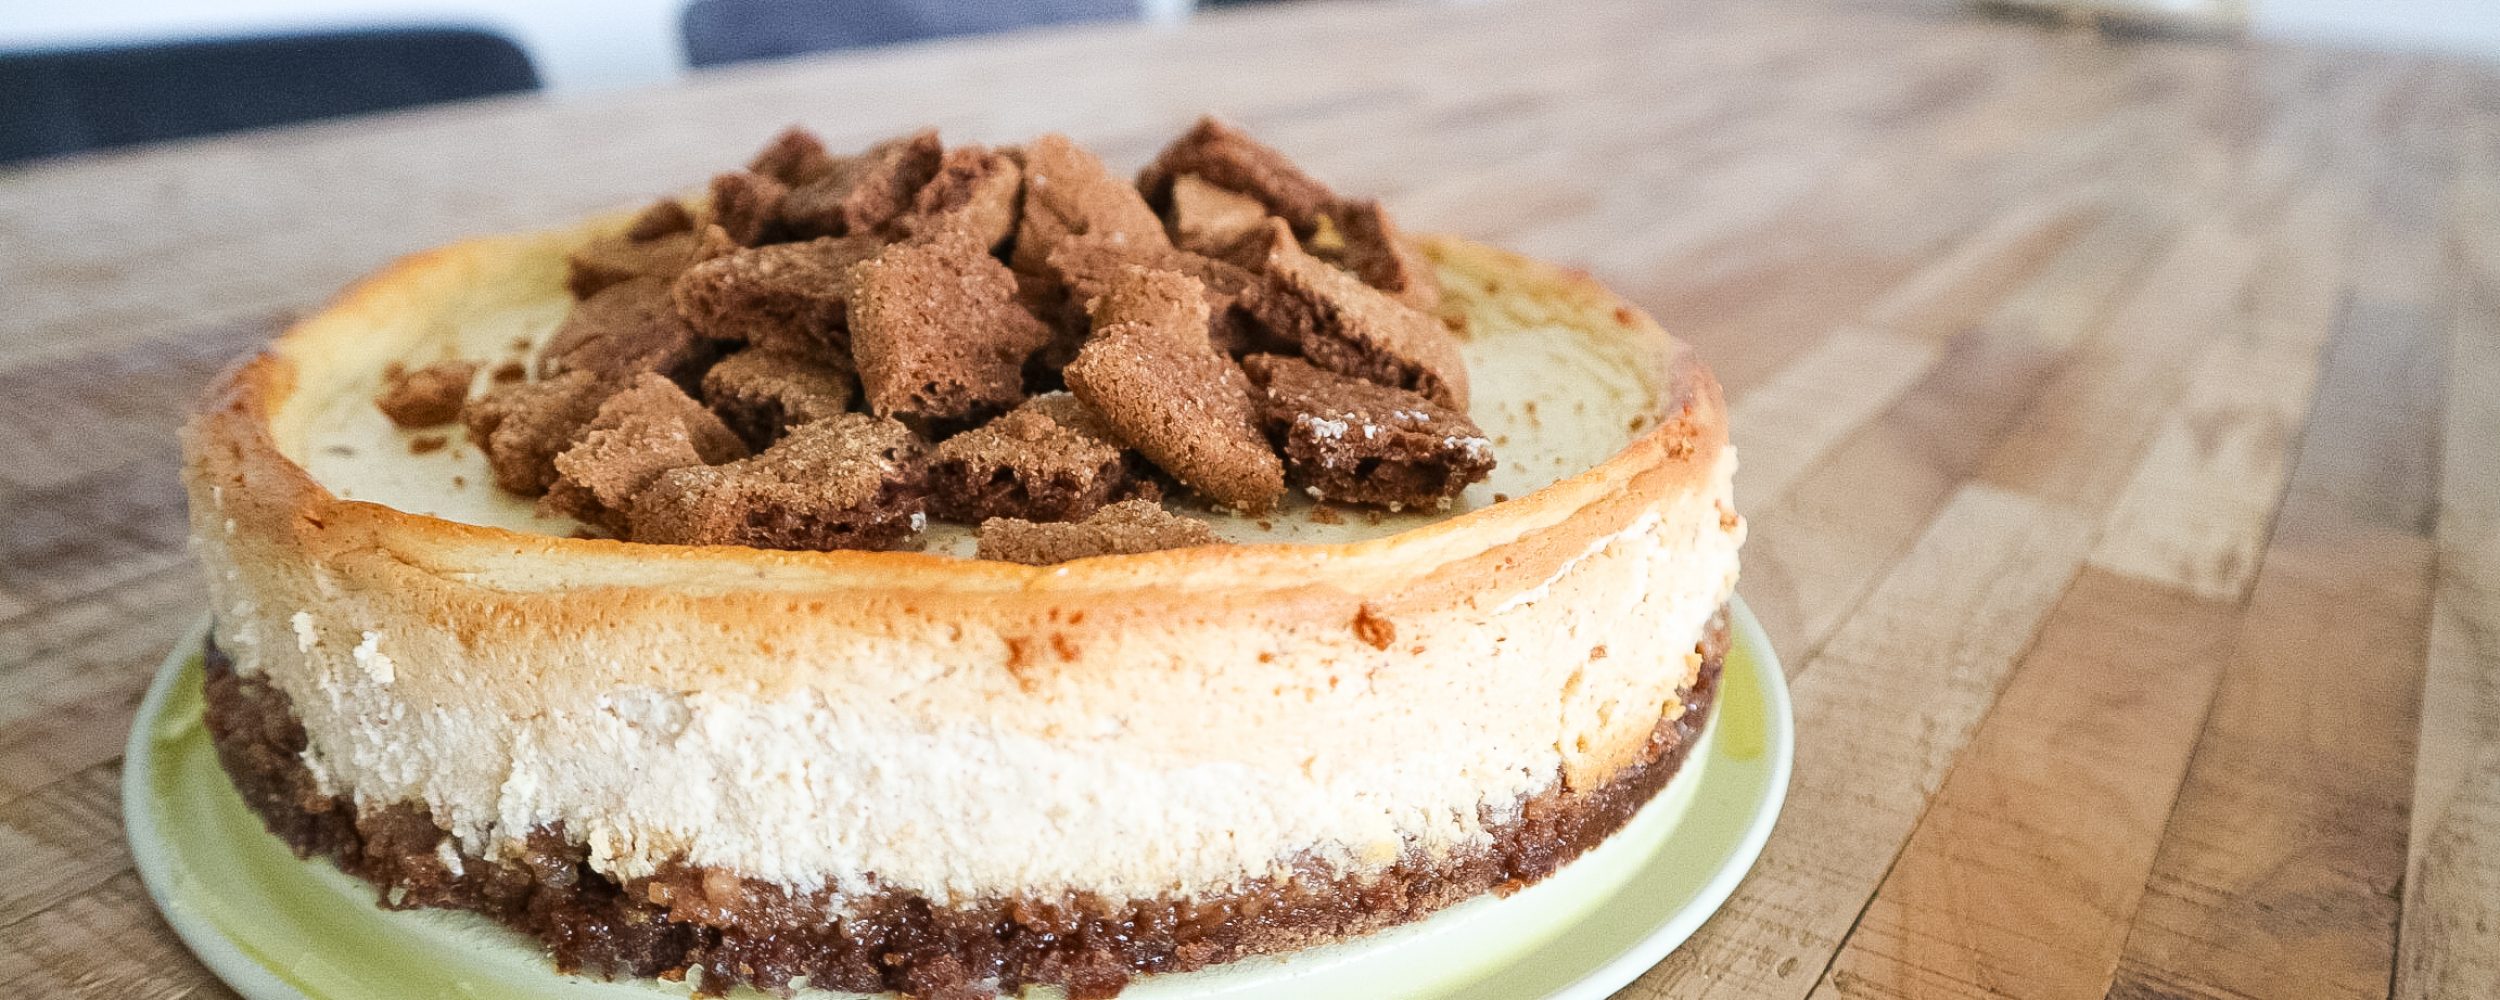 speculaas cheesecake